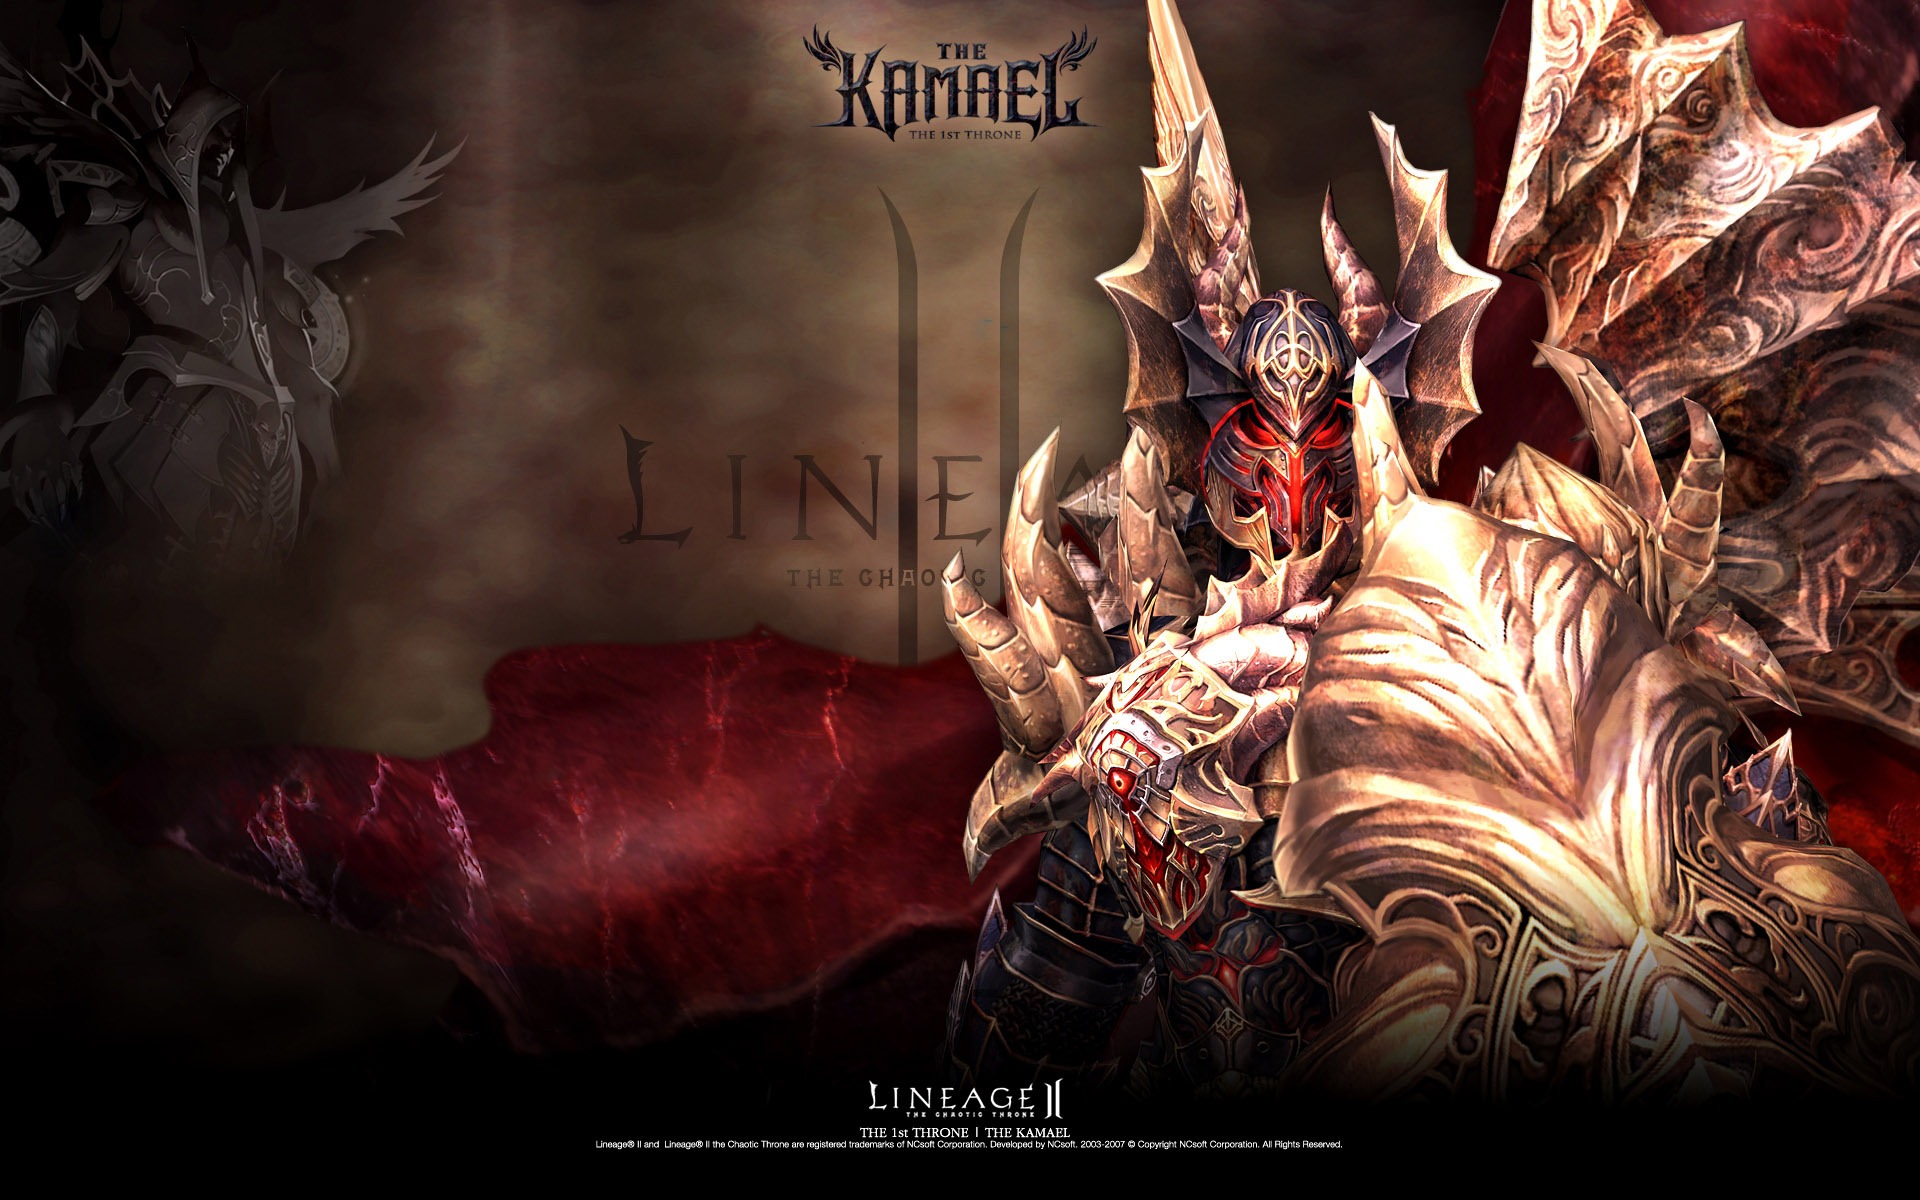 LINEAGE Ⅱ Modellierung HD-Gaming-Wallpaper #11 - 1920x1200